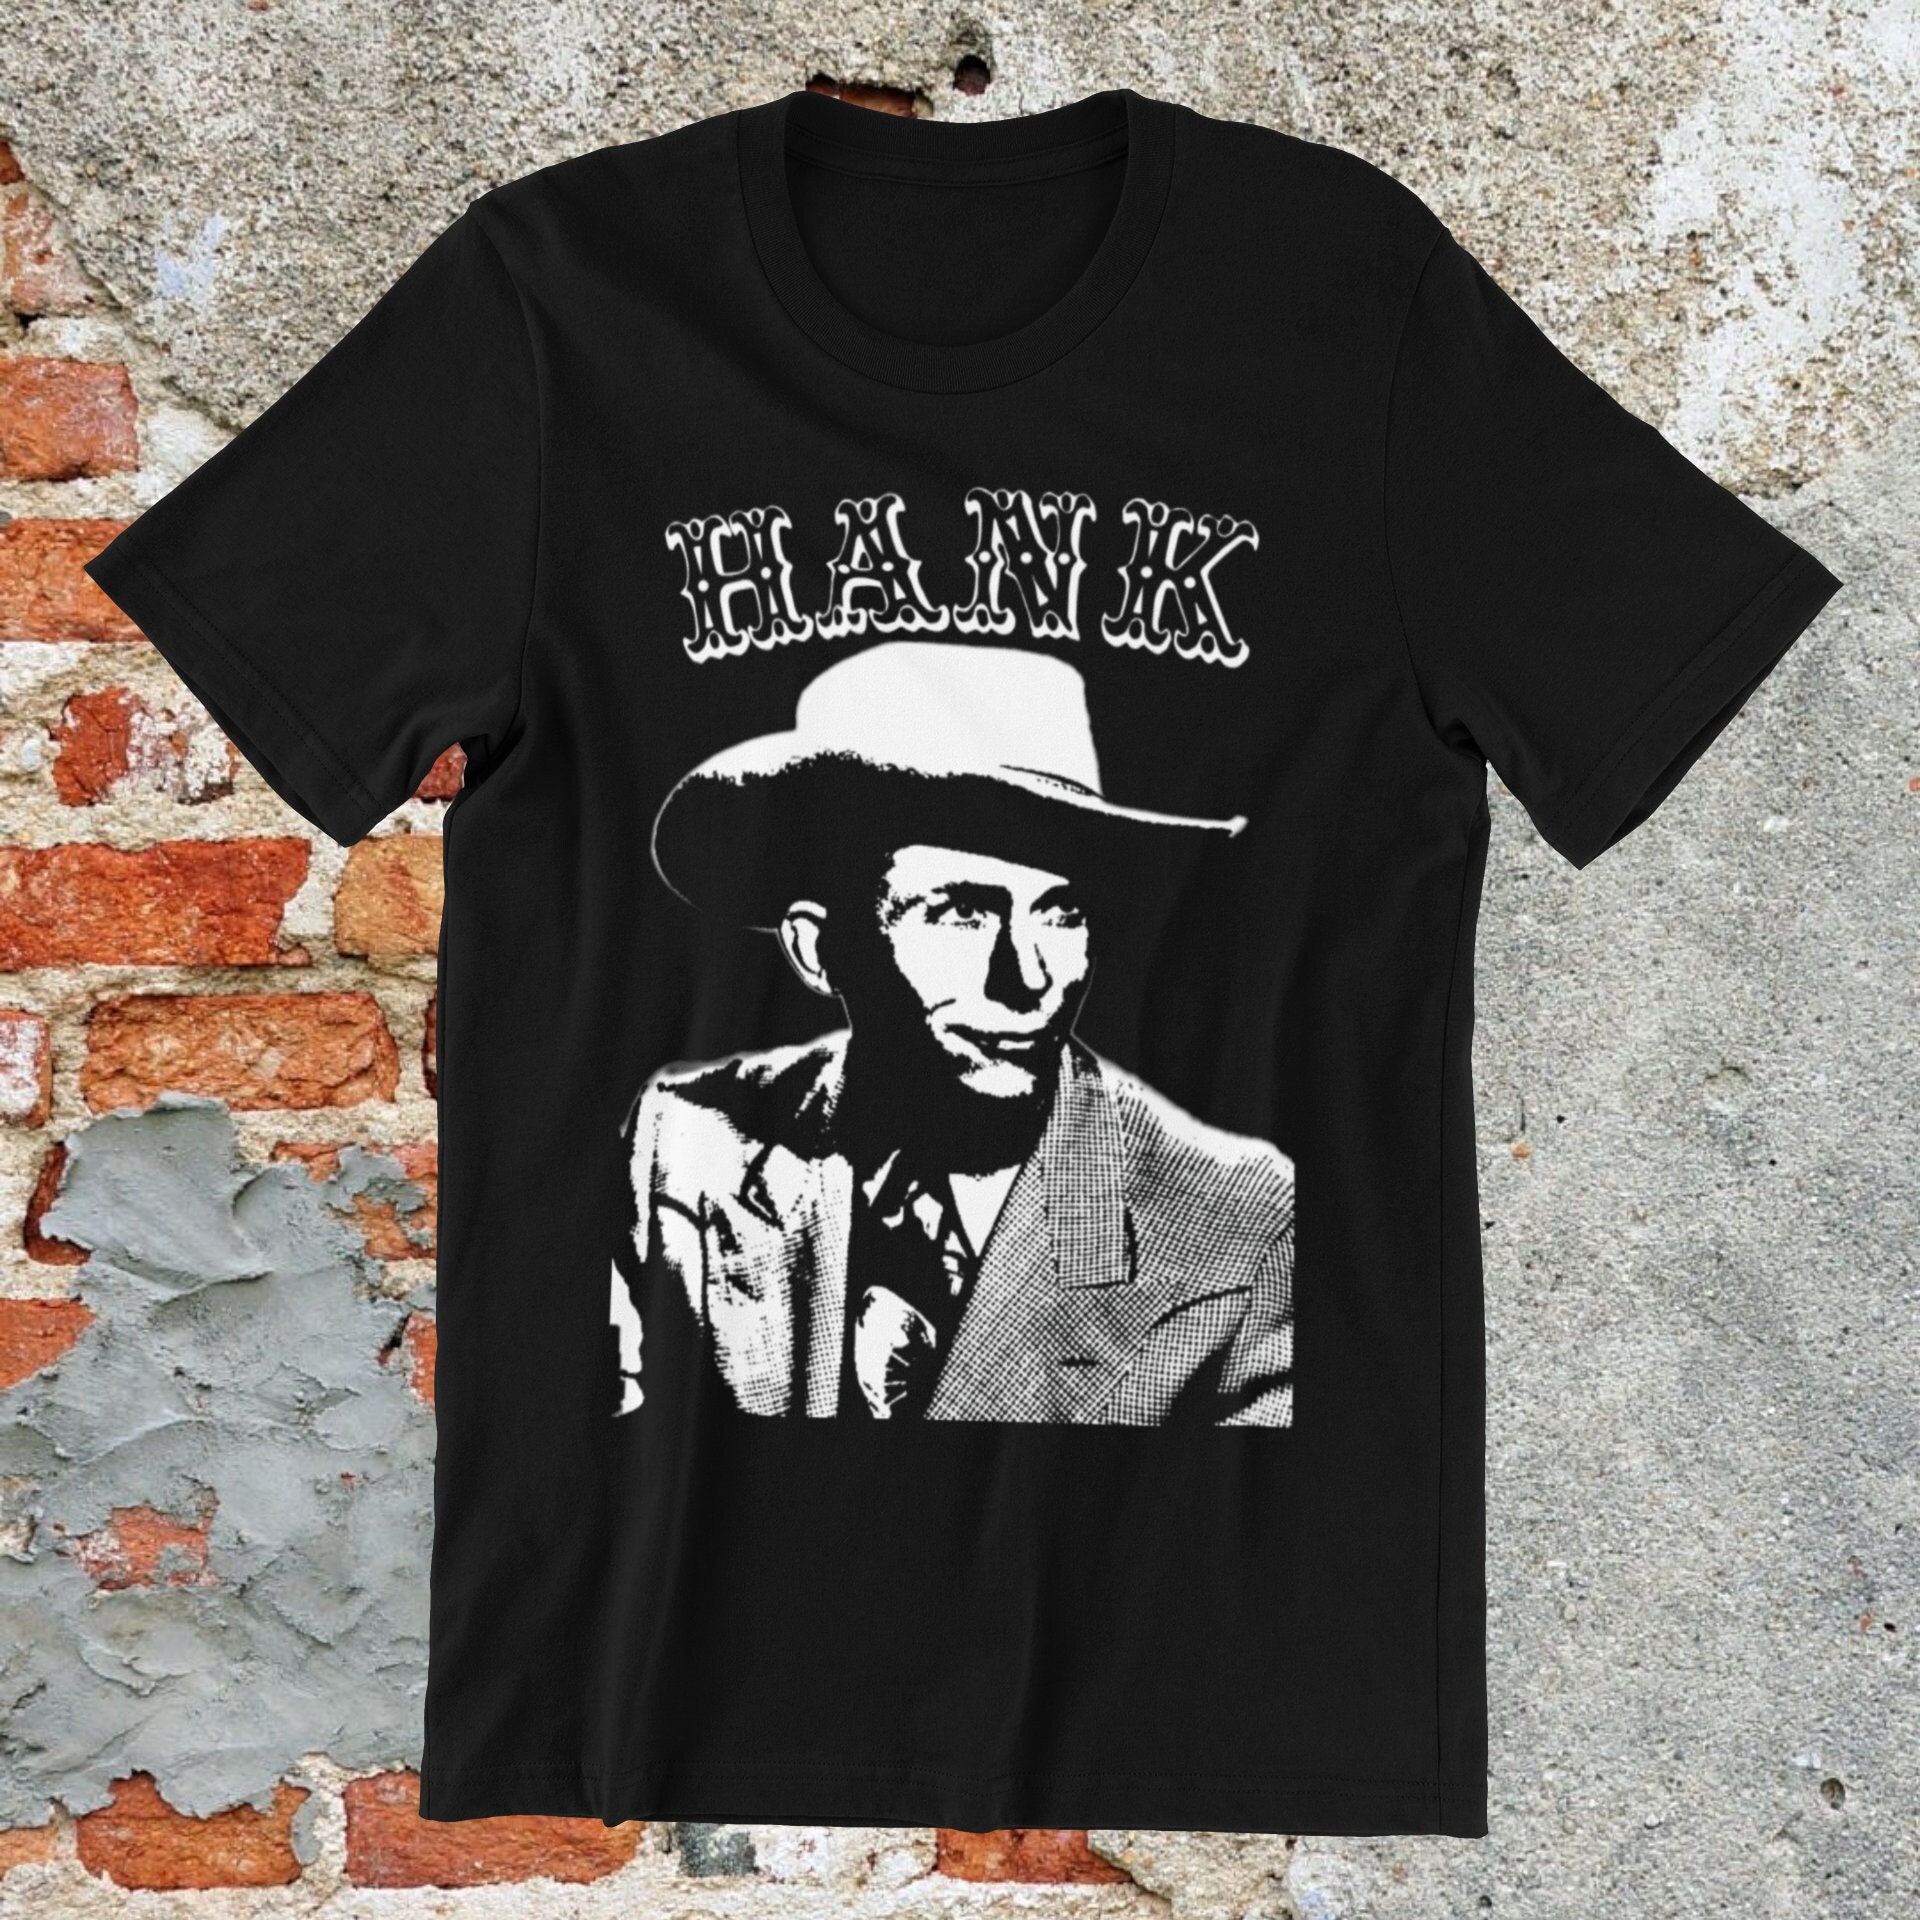 HANK WILLIAMS T-SHIRT - Outlaw Country Music Shirt - Country Western Tee